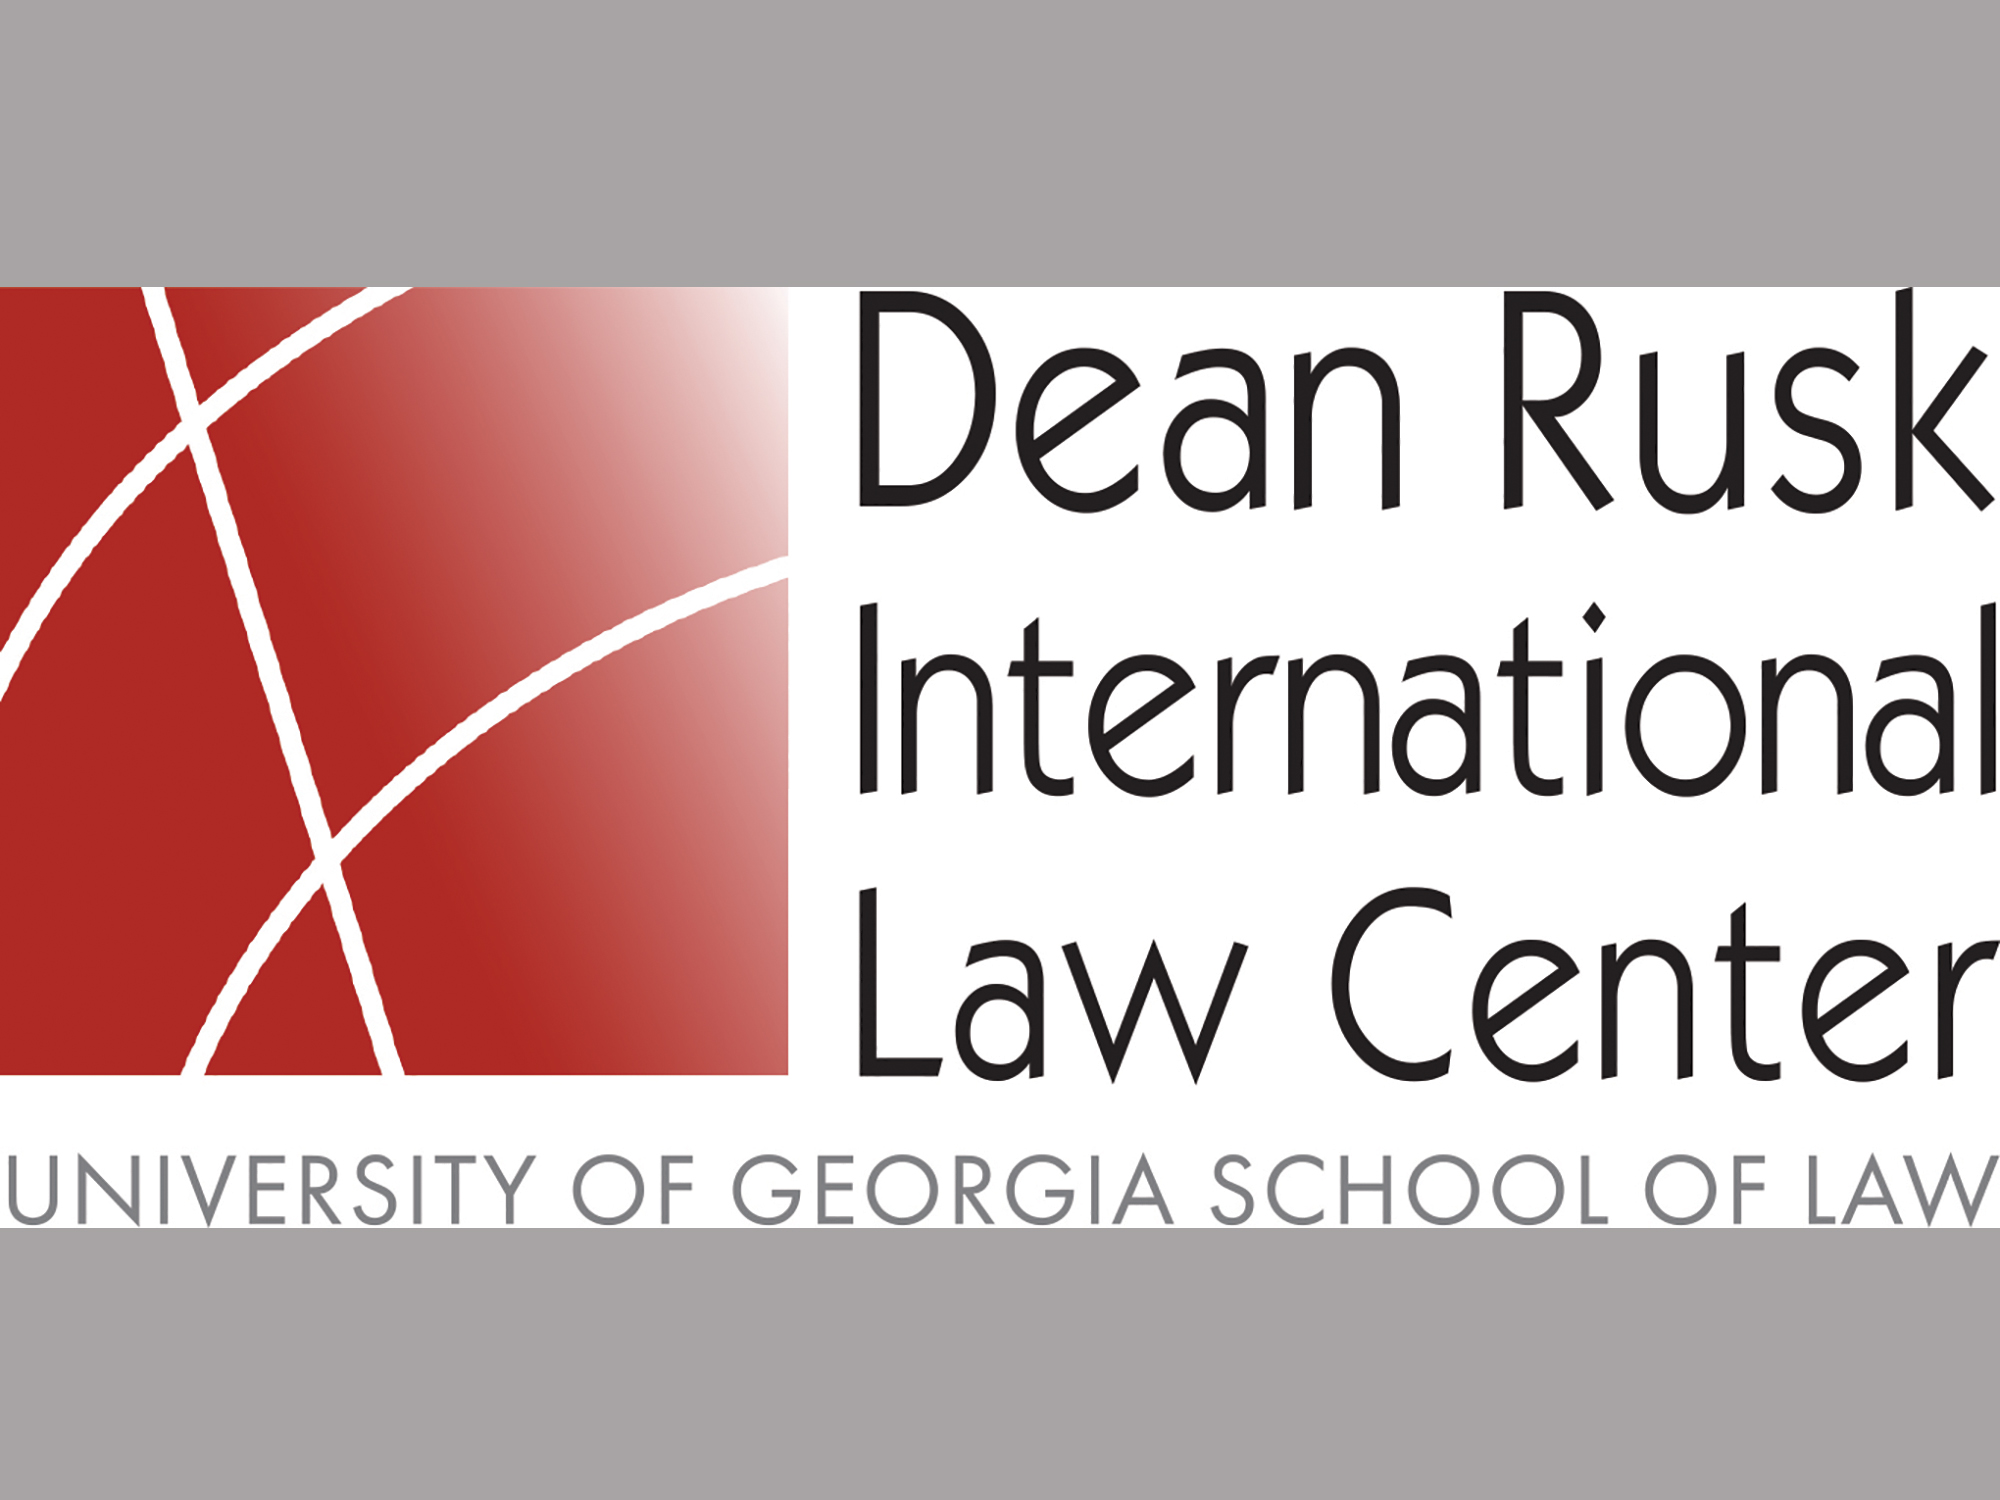 Rusk Center anchors law school’s top 20 international law ranking